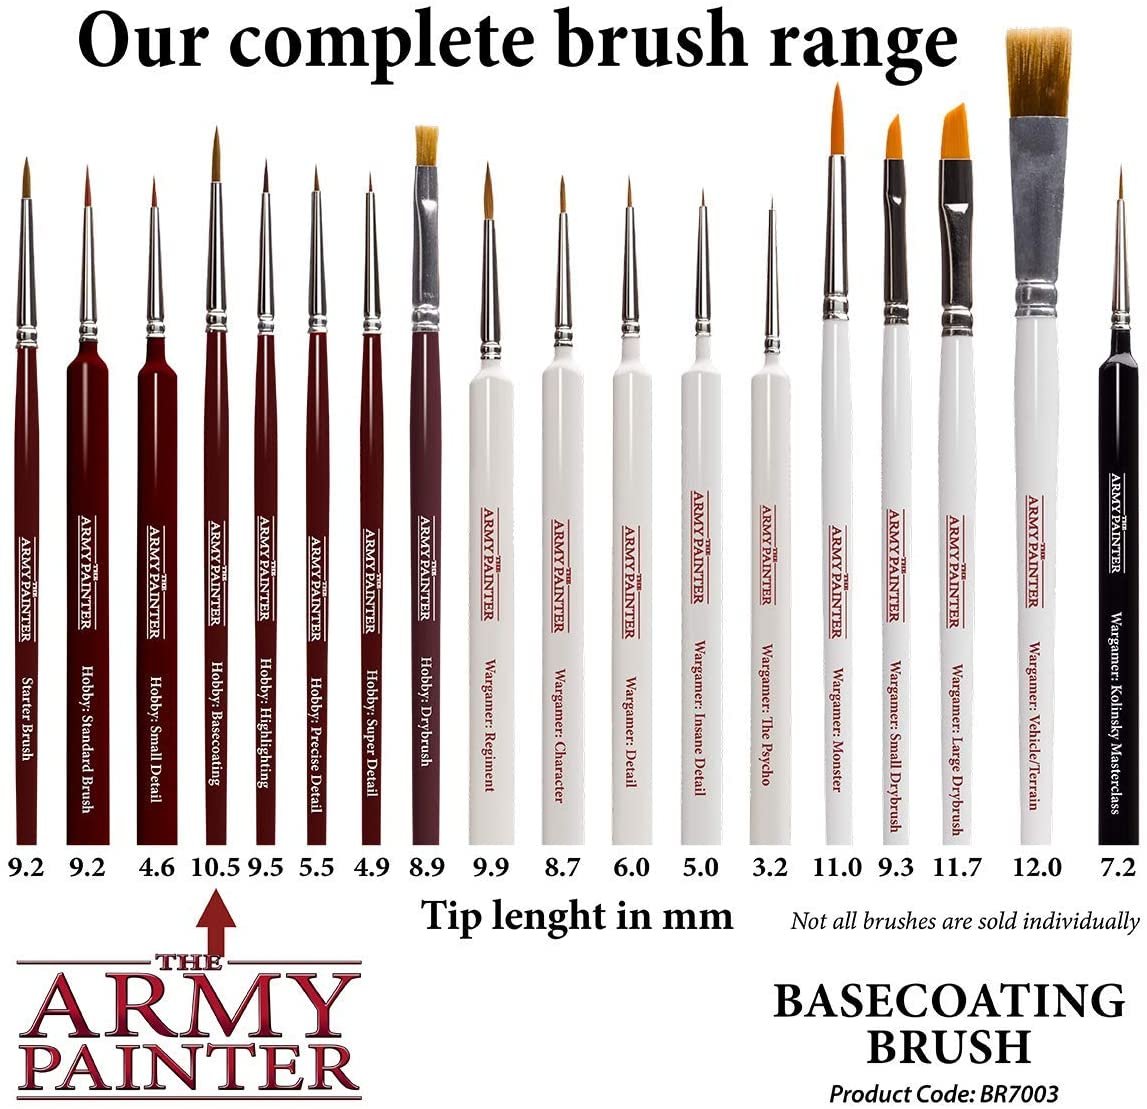 The Army Painter - Hobby and WarGamer Brushes - all brushes and